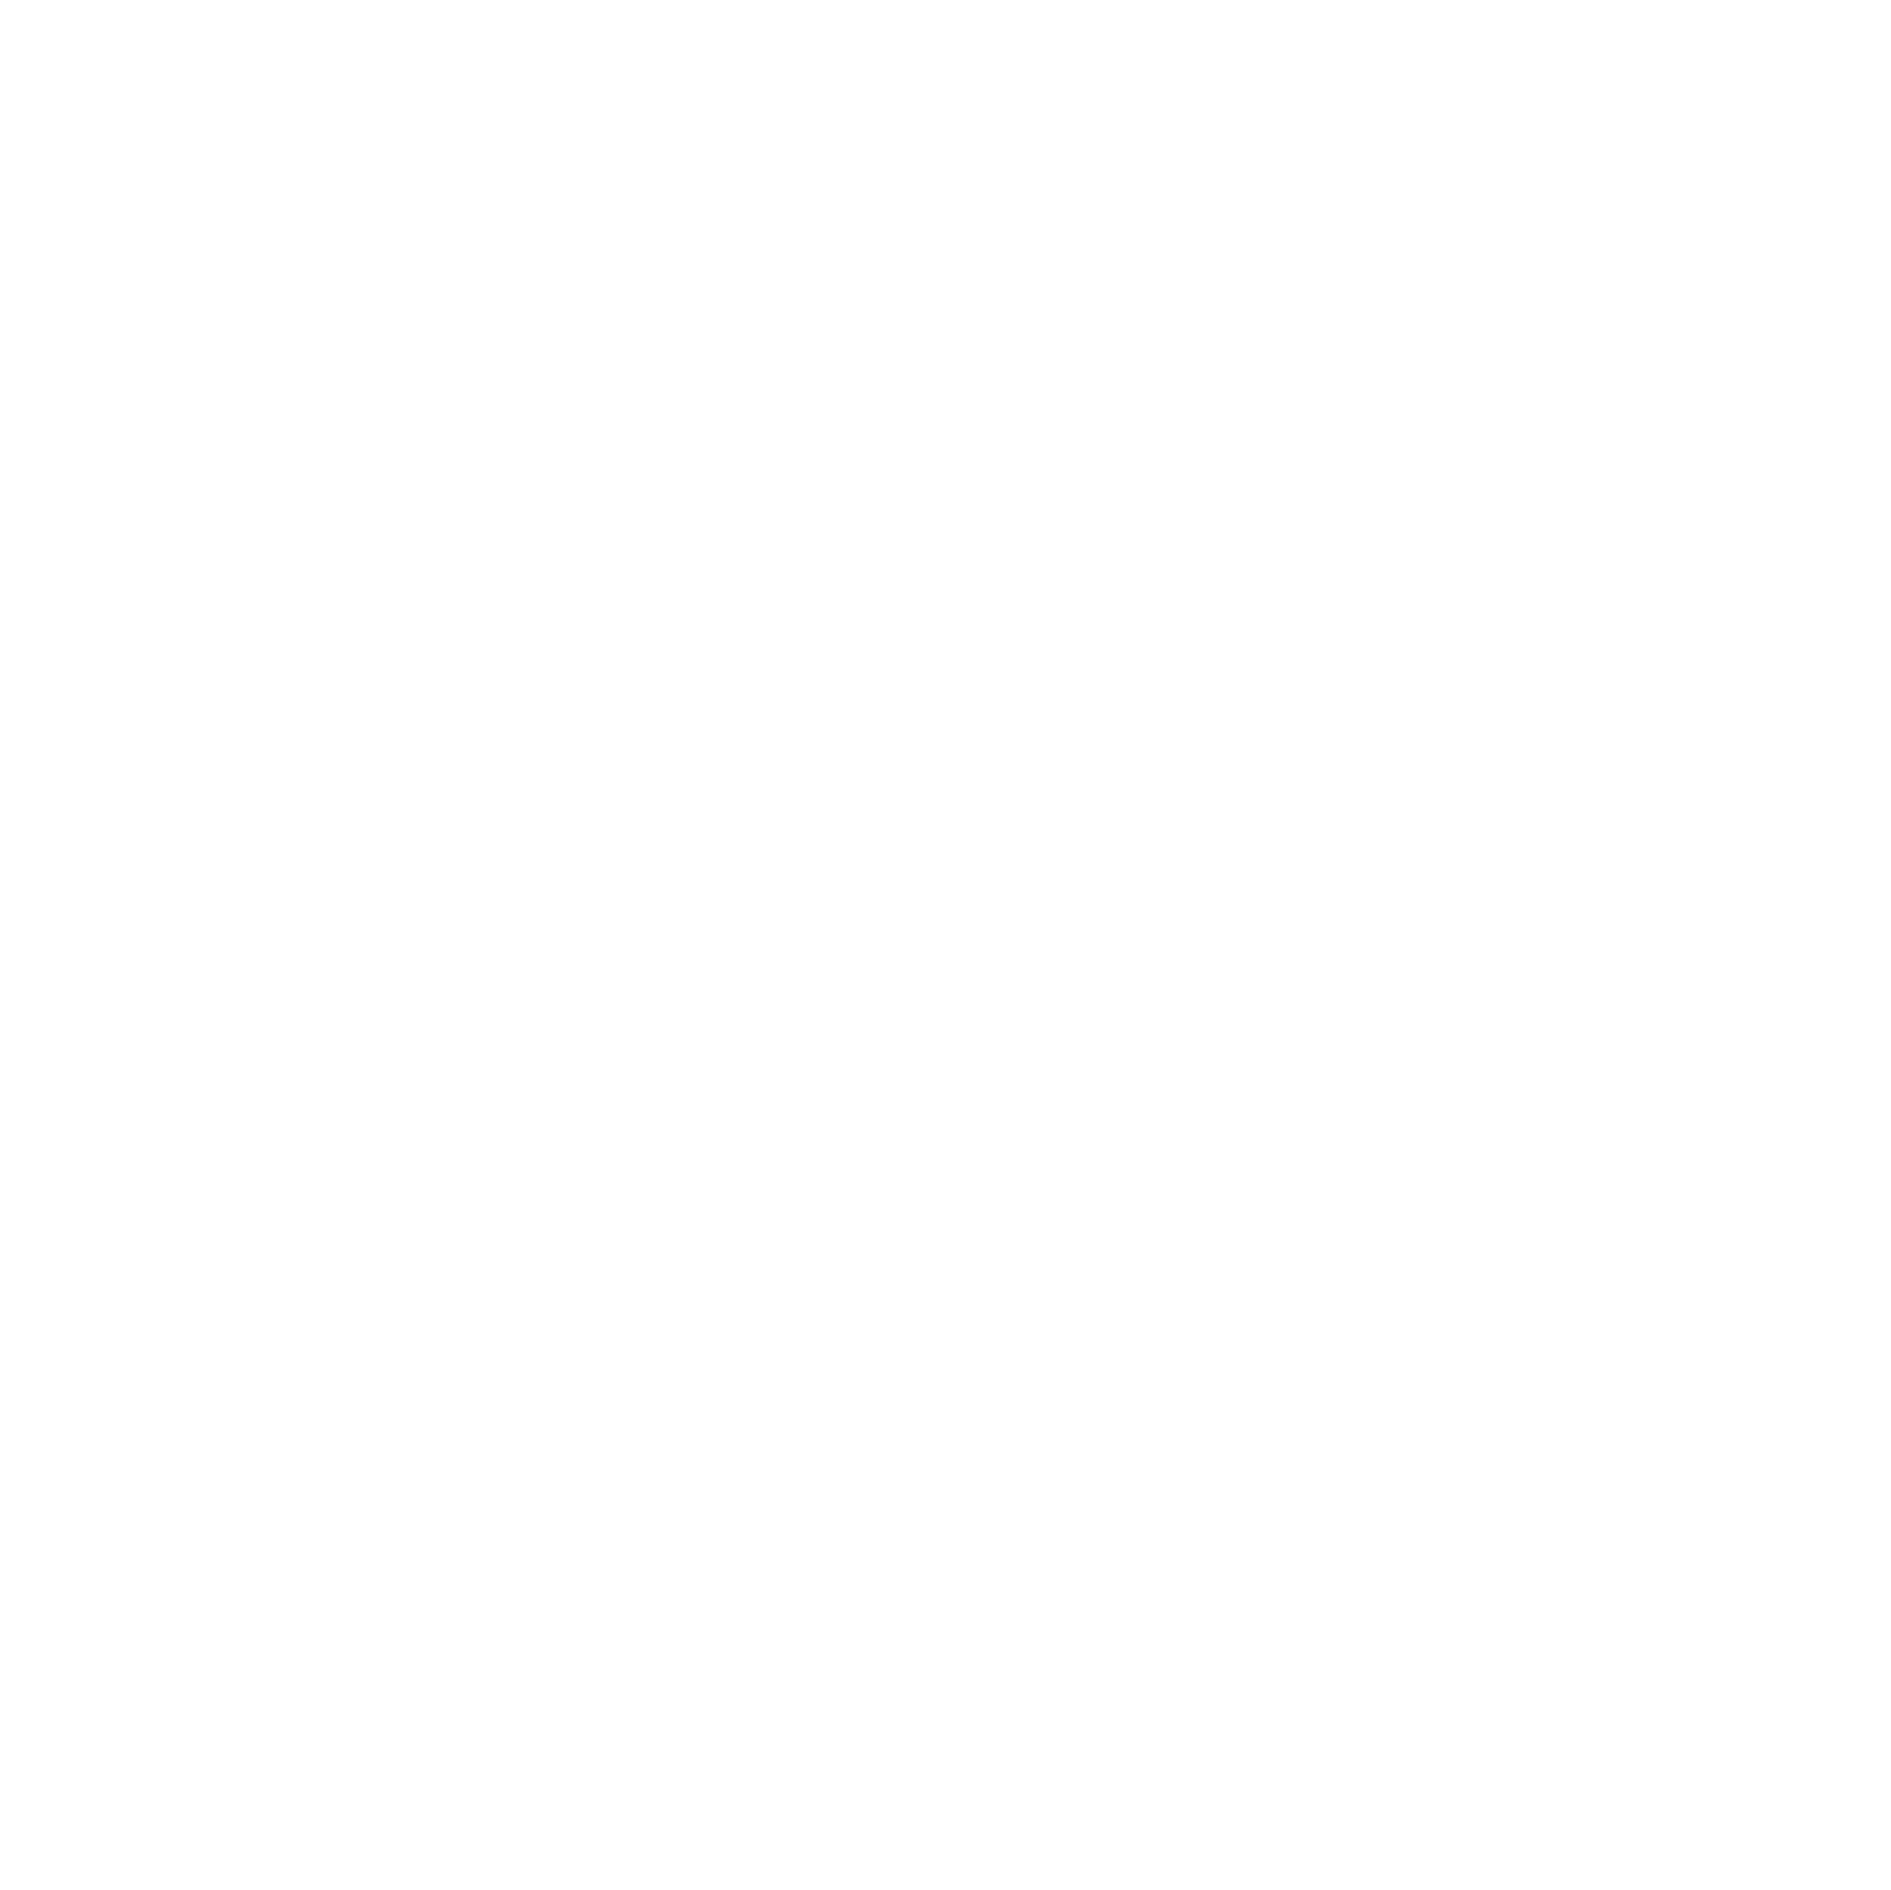 Blue Rose Beauty &amp; Brow Artistry | Eyebrow Threading, Tinting, Waxing, Microblading, and Permanent Makeup in Little Rock